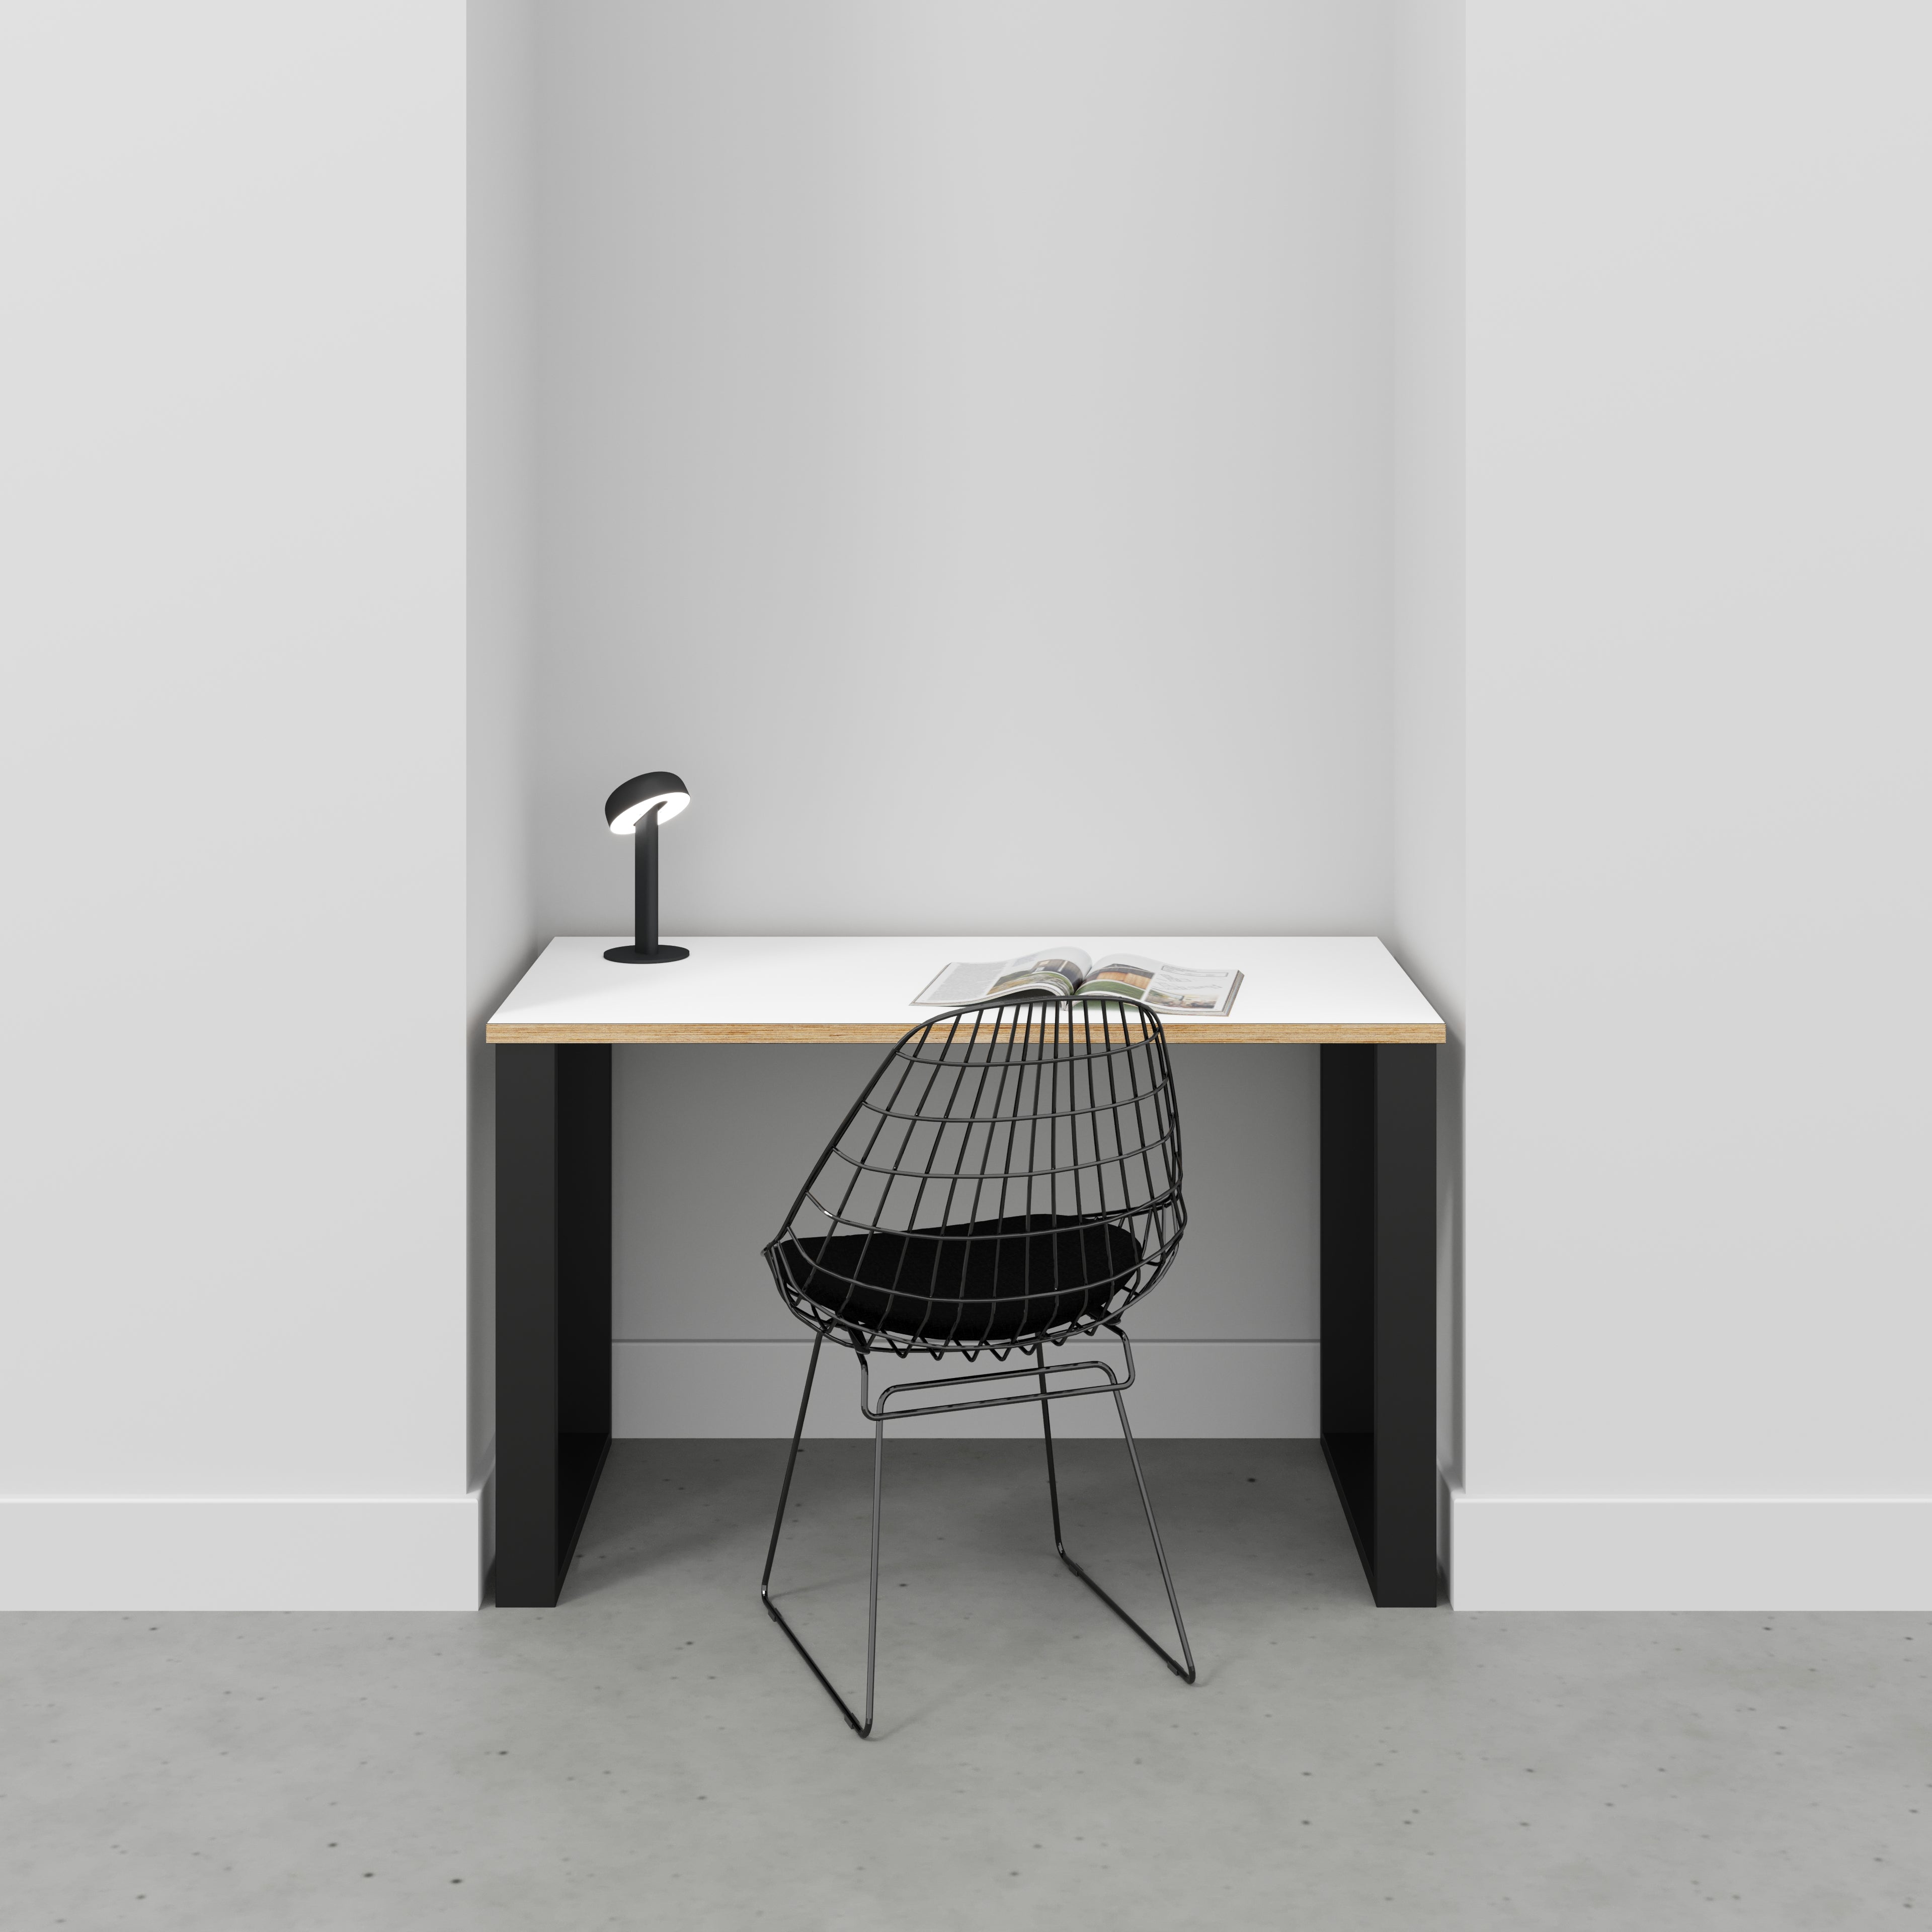 Desk with Black Industrial Legs - Formica White - 1200(w) x 600(d) x 735(h)